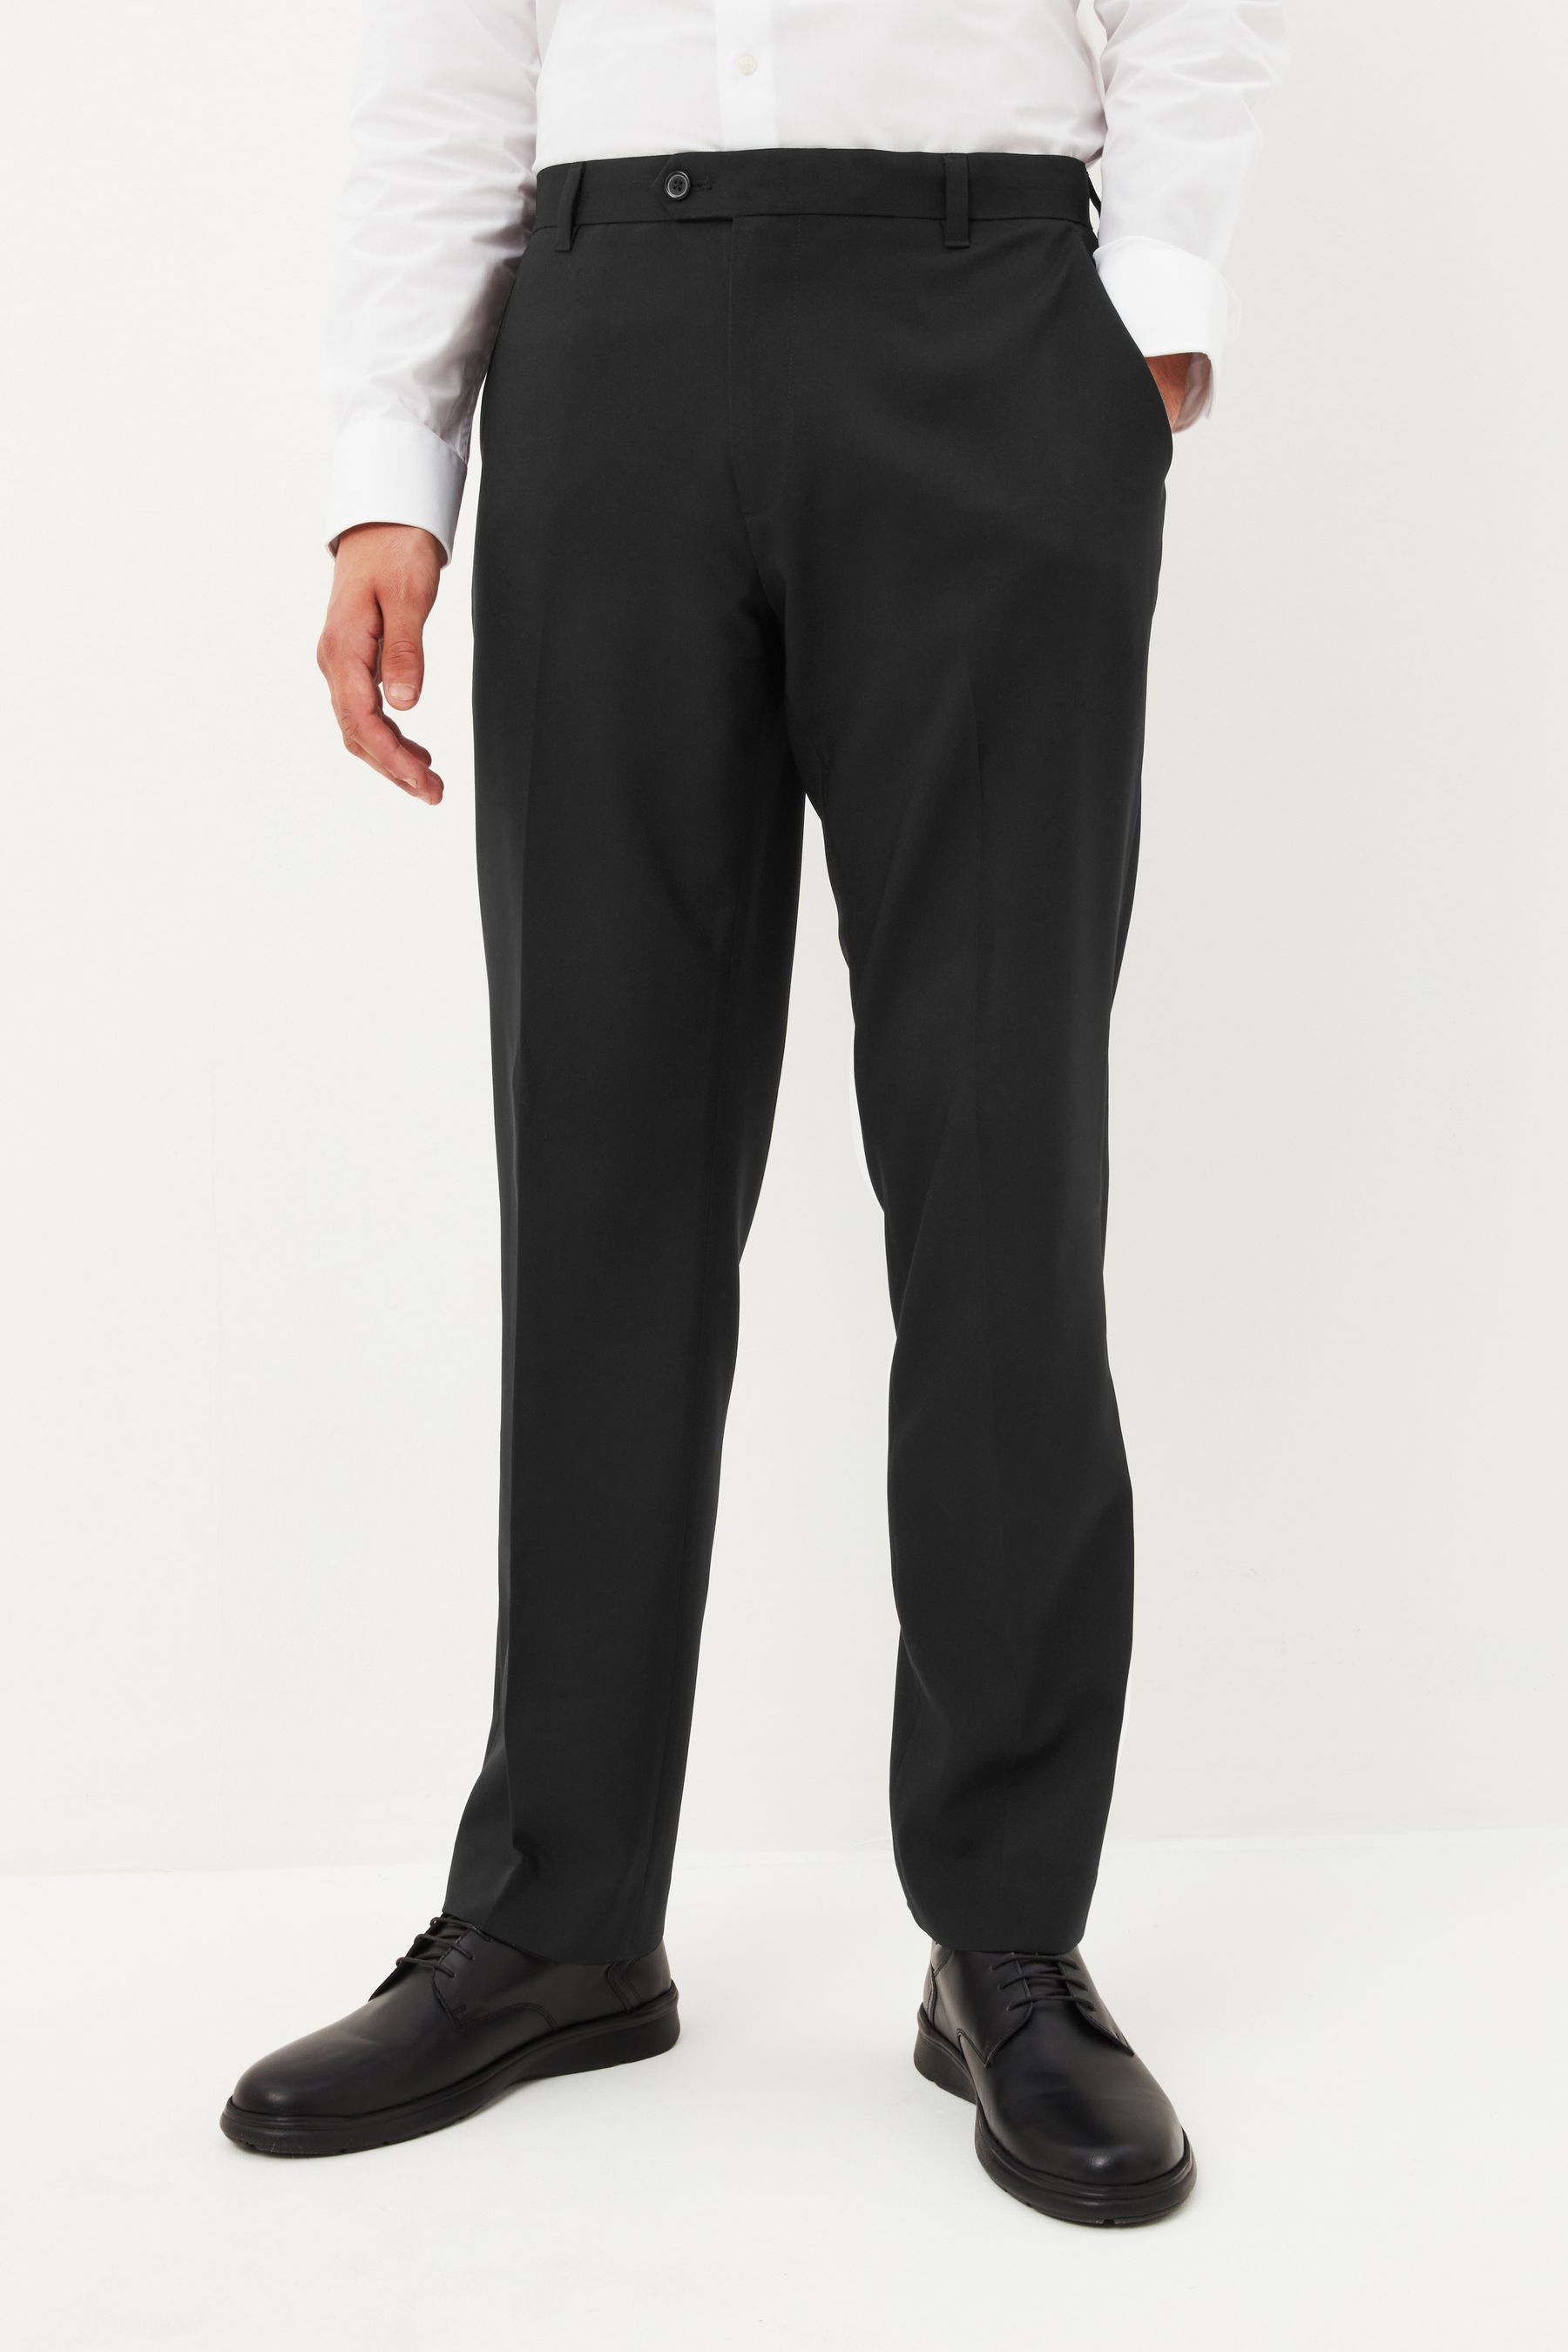 Buy Black Machine Washable Plain Front Smart Trousers from the Next UK ...